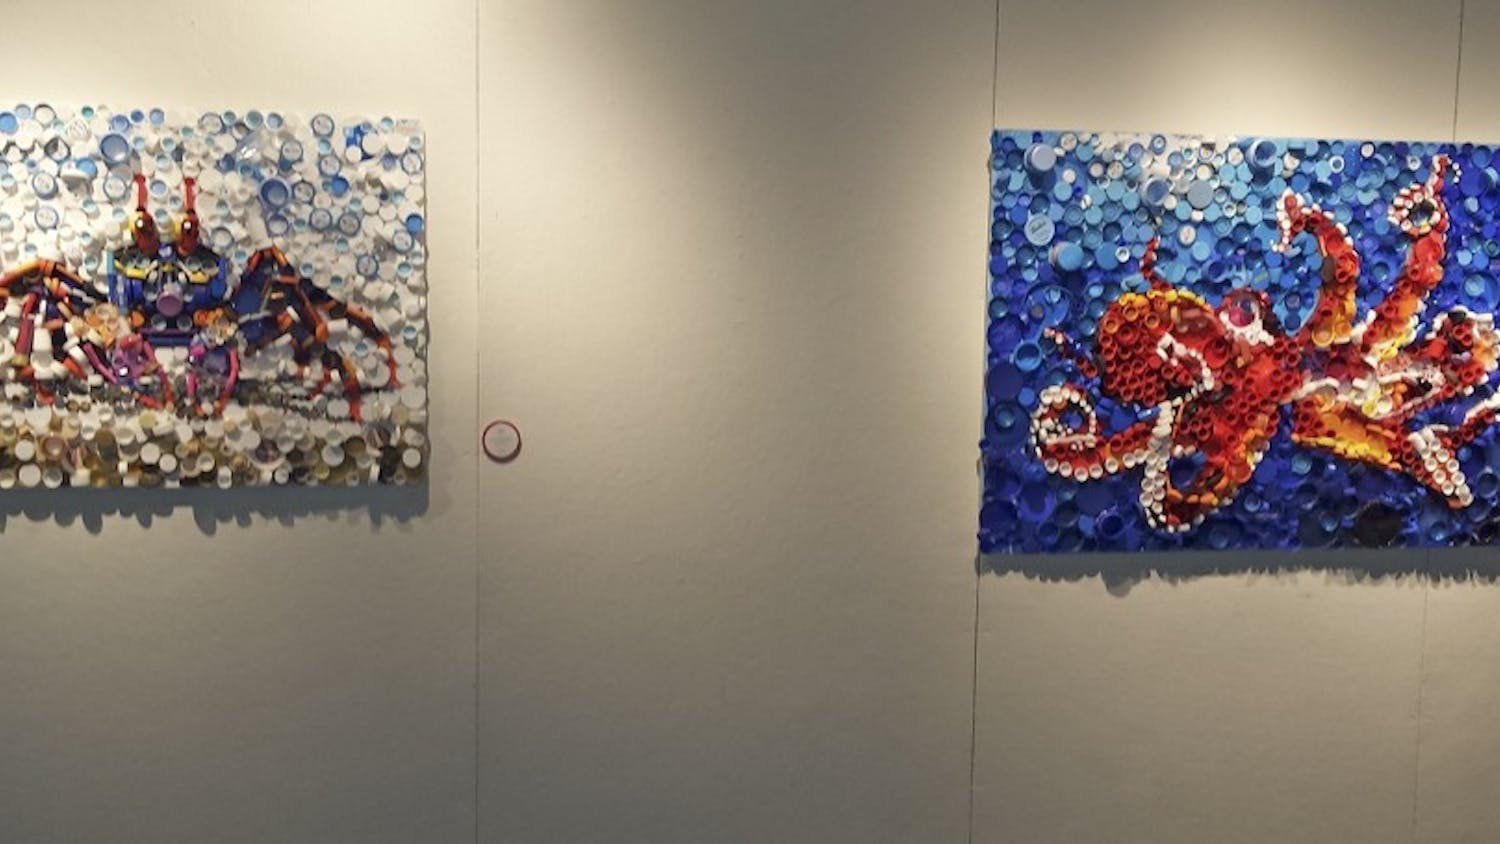 The Beauty through Toxicity art exhibit is currently on display in the Union.